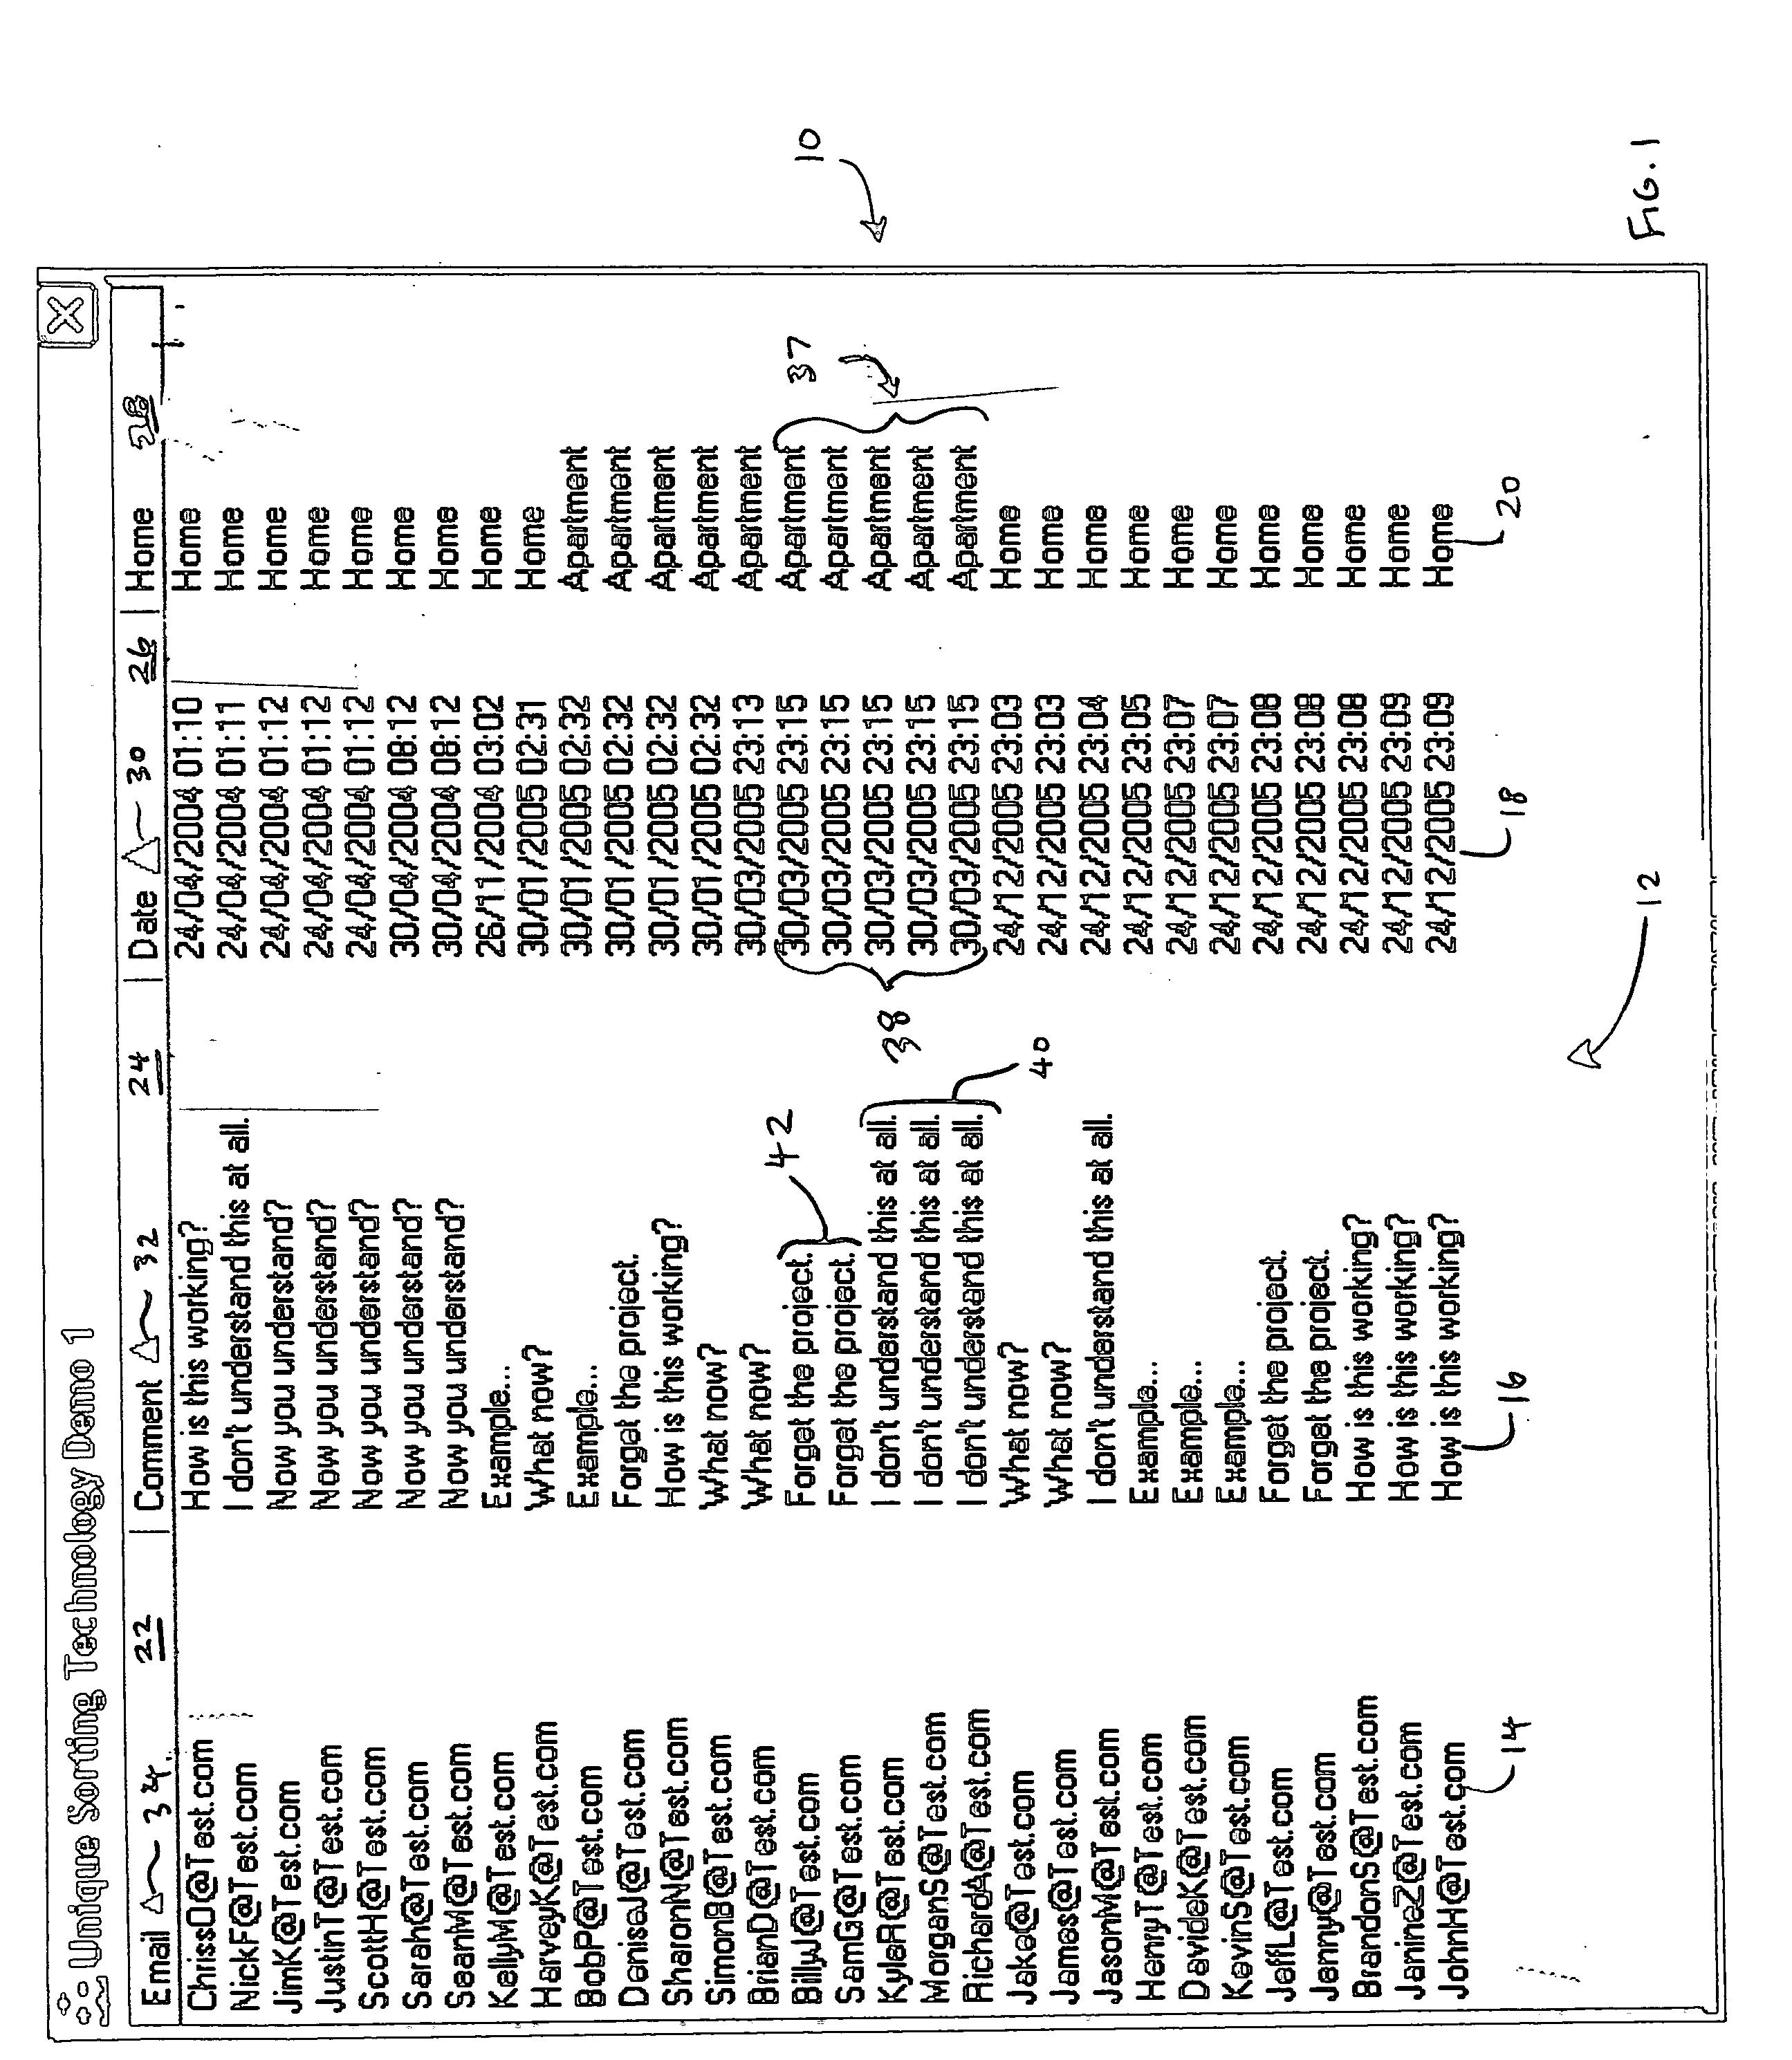 User interface and method for sorting data records